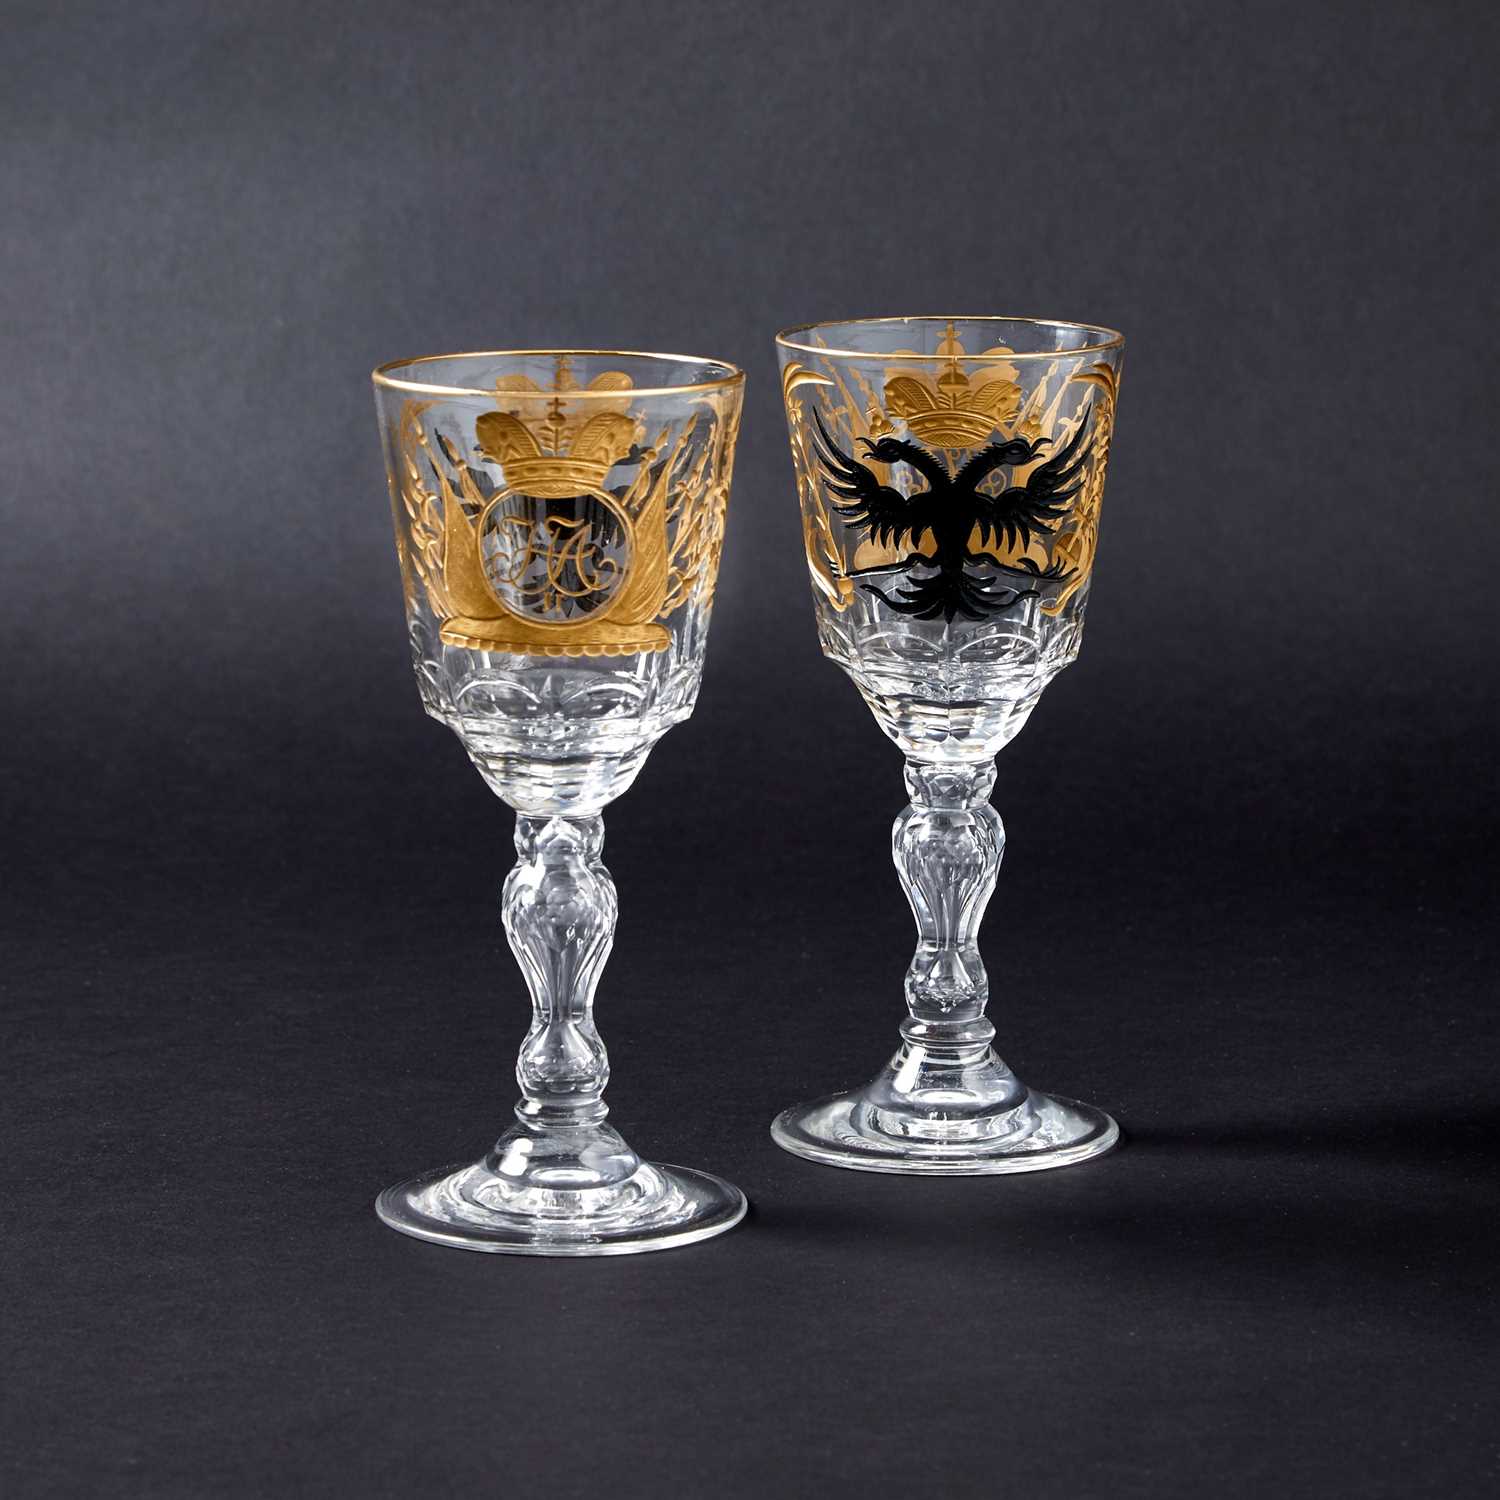 Lot 684 - Pair of Russian Glass Goblets from the Service for the Romanov Tercentenary